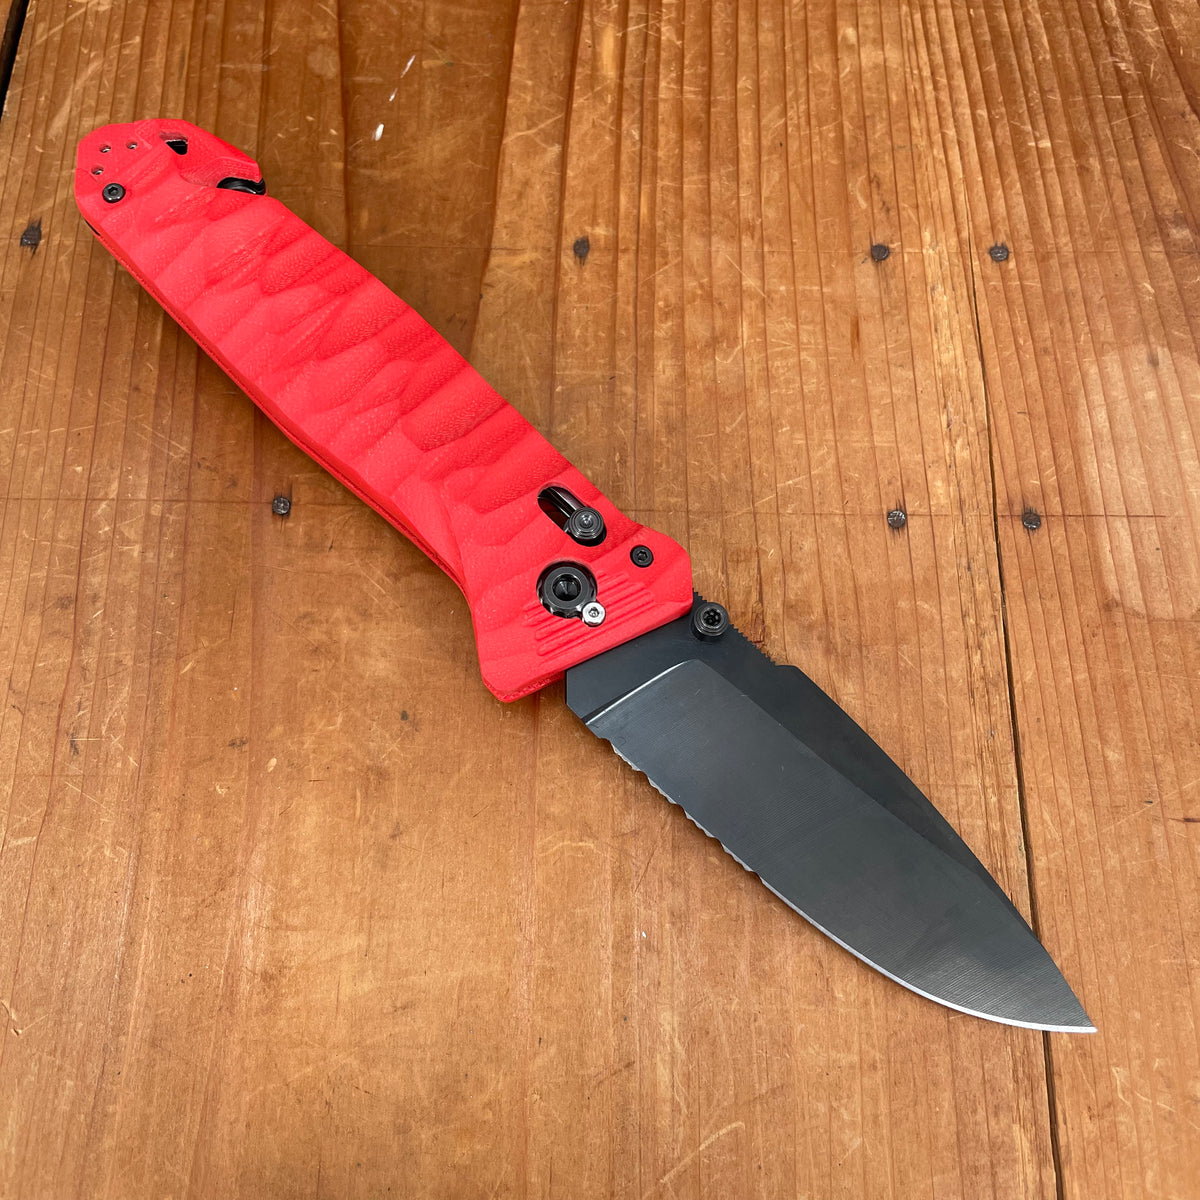 Tarrerias-Bonjean Outdoor C.A.C. S200 Pocket Knife Axis Lock Red